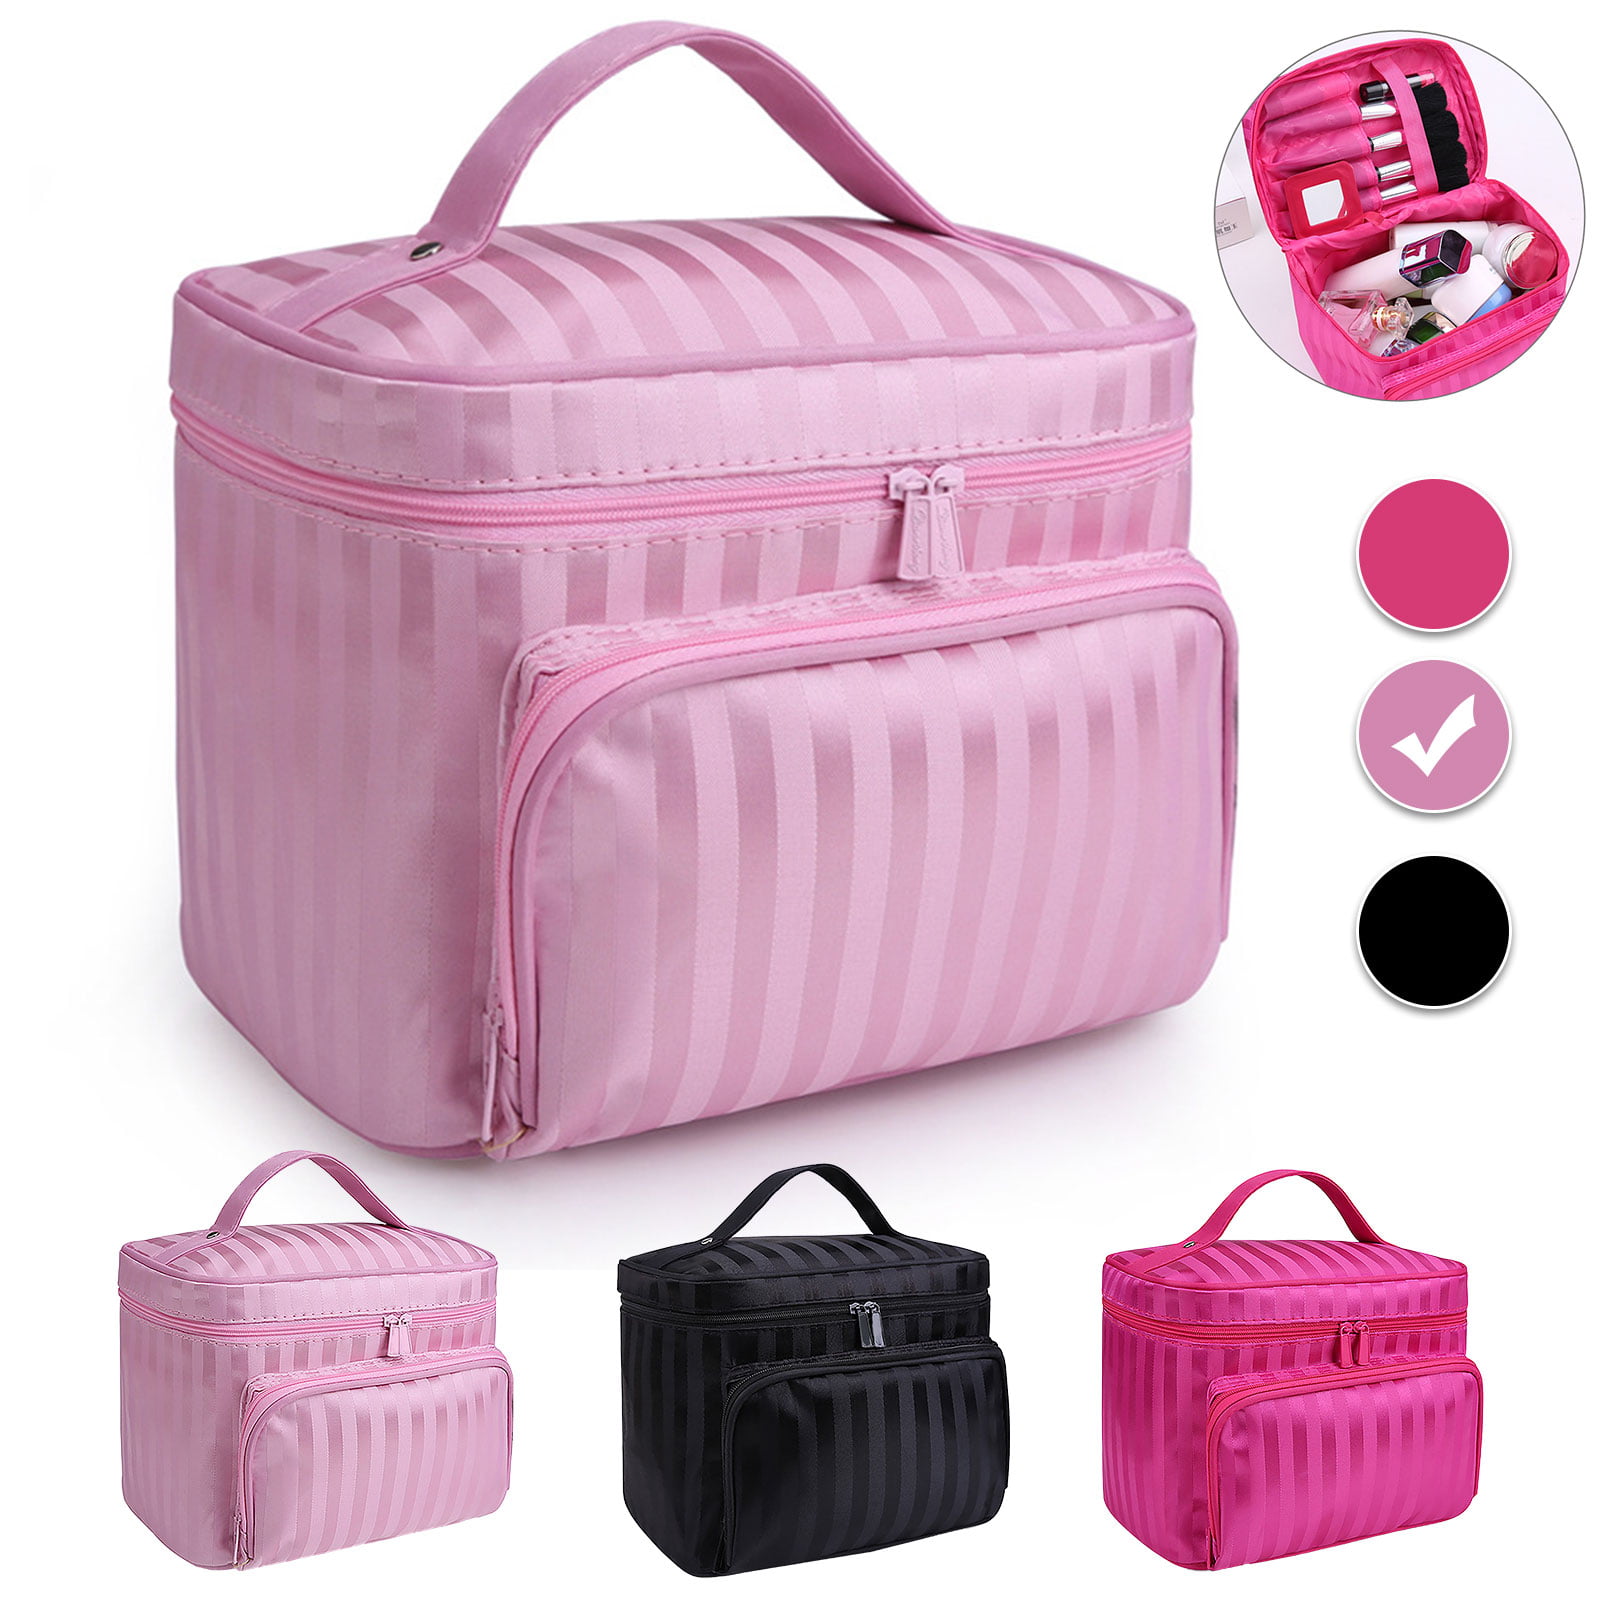 Large Makeup Case, Stripe/Rhombic Makeup Bag Storage Bag Organizer, Waterproof Travel Cosmetic Case Box, Portable Train Cases for Cosmetics Brushes, Toiletries, Gift for Women - Walmart.com